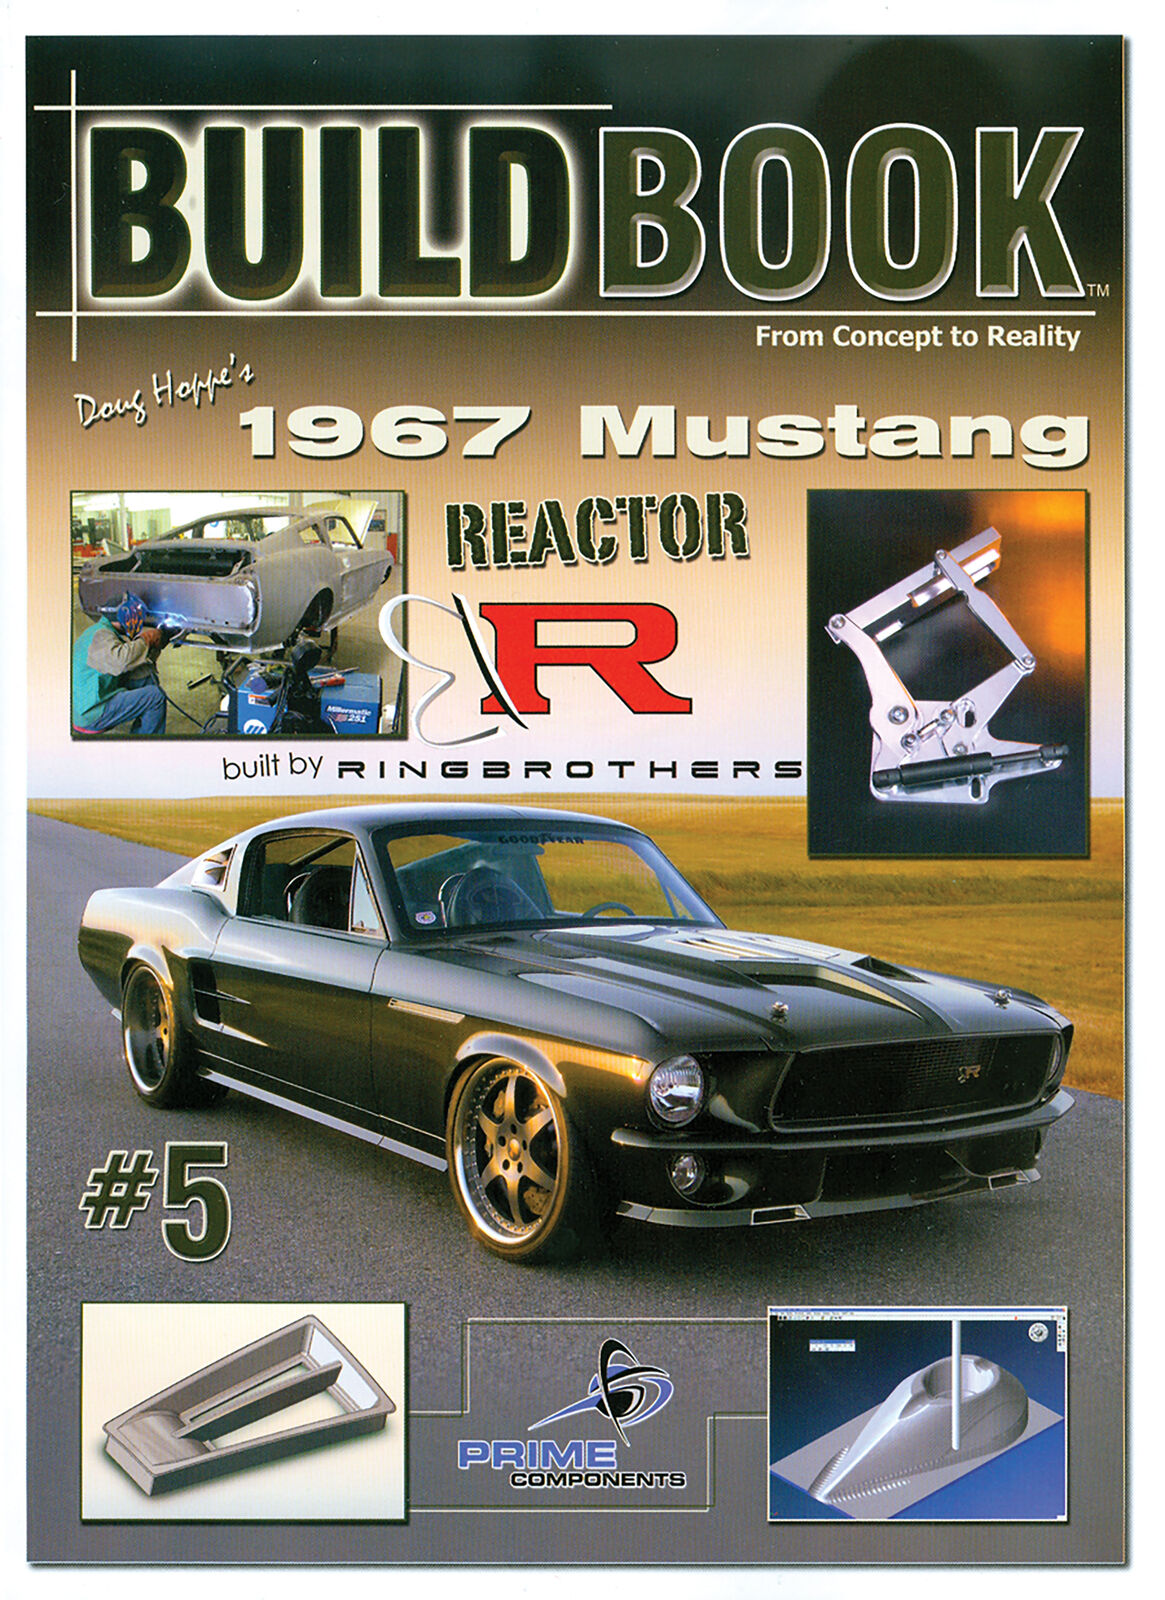 1967 Mustang Reactor Build Book By Ring Brothers